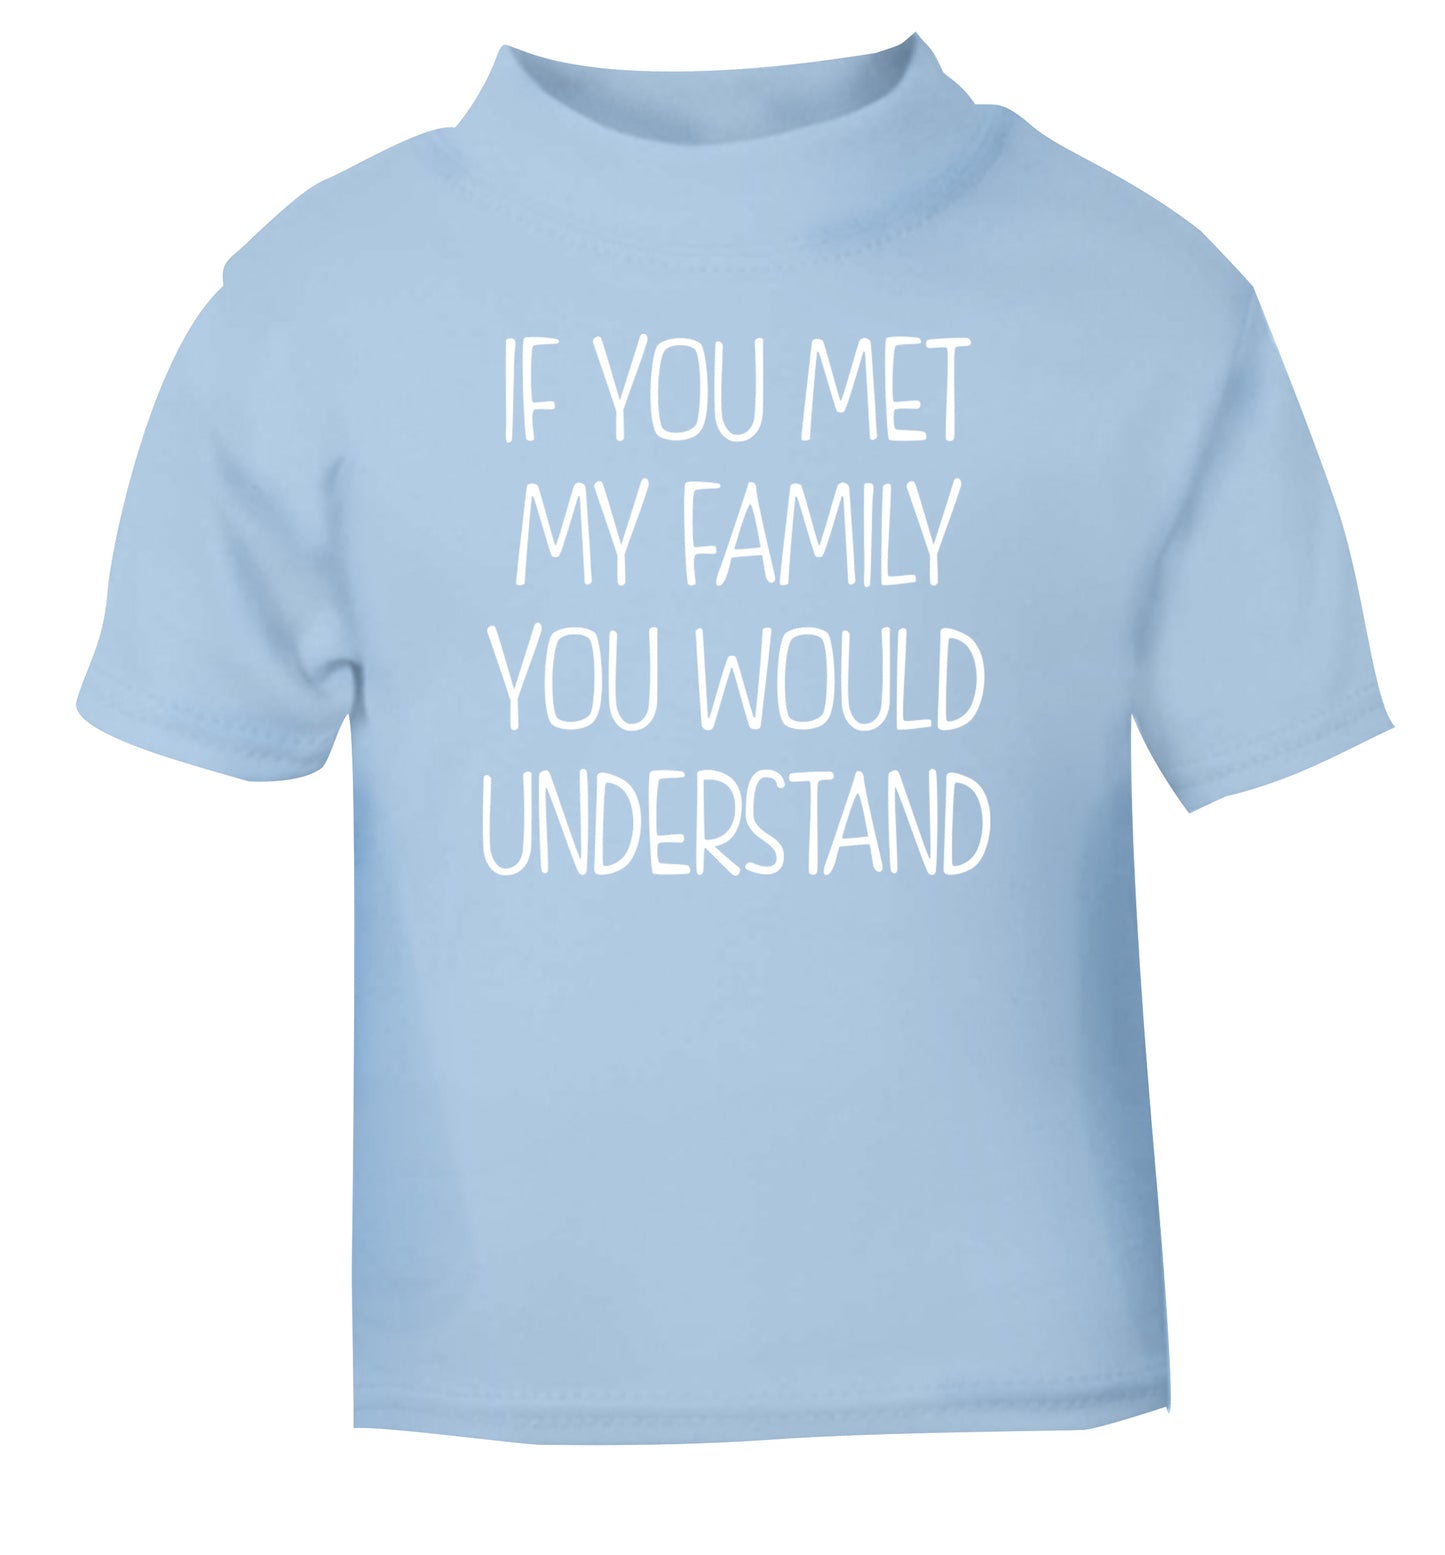 If you met my family you would understand light blue Baby Toddler Tshirt 2 Years